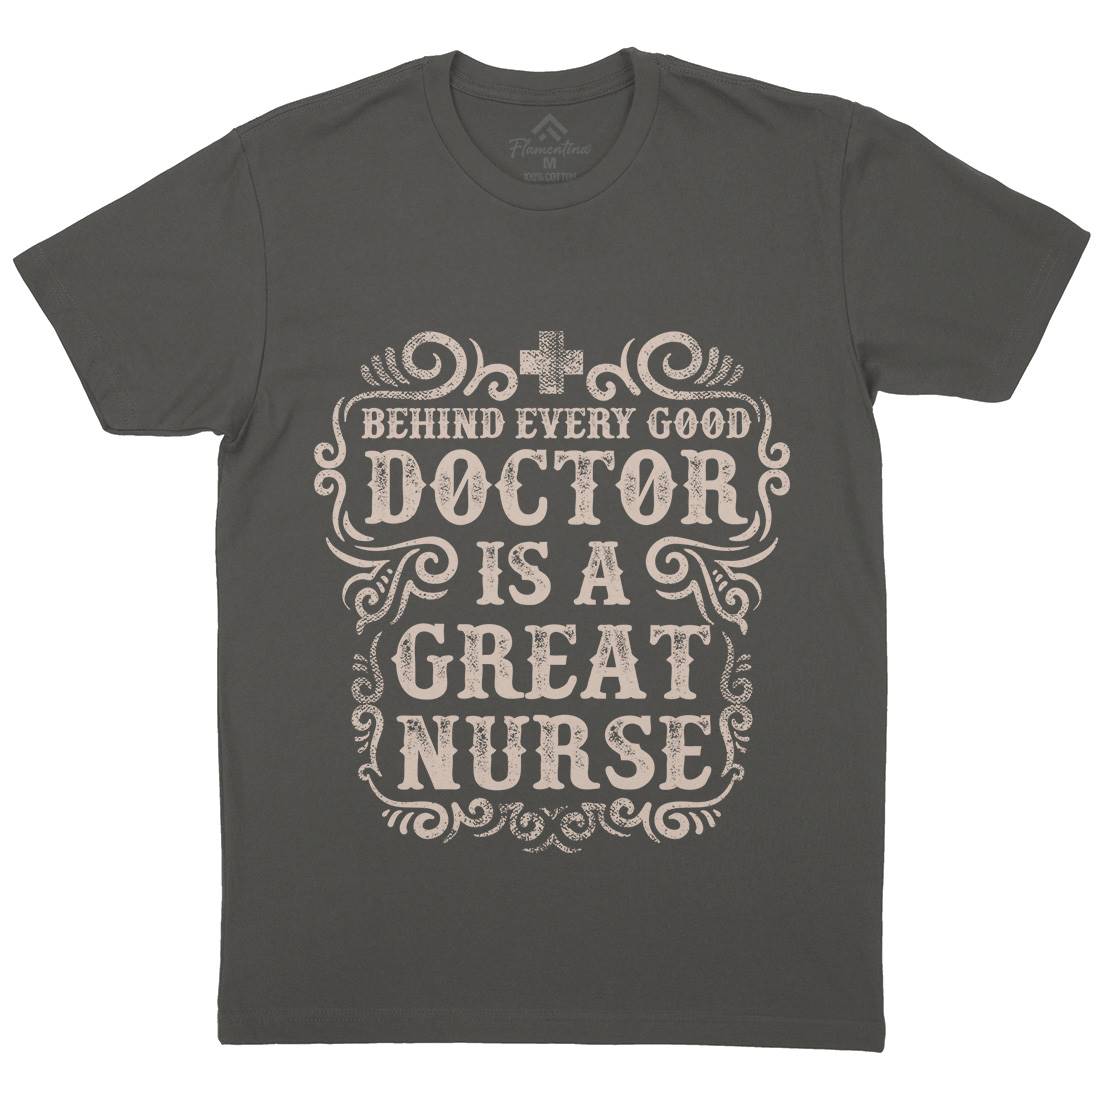 Behind Every Good Doctor Is A Great Nurse Mens Organic Crew Neck T-Shirt Work C910